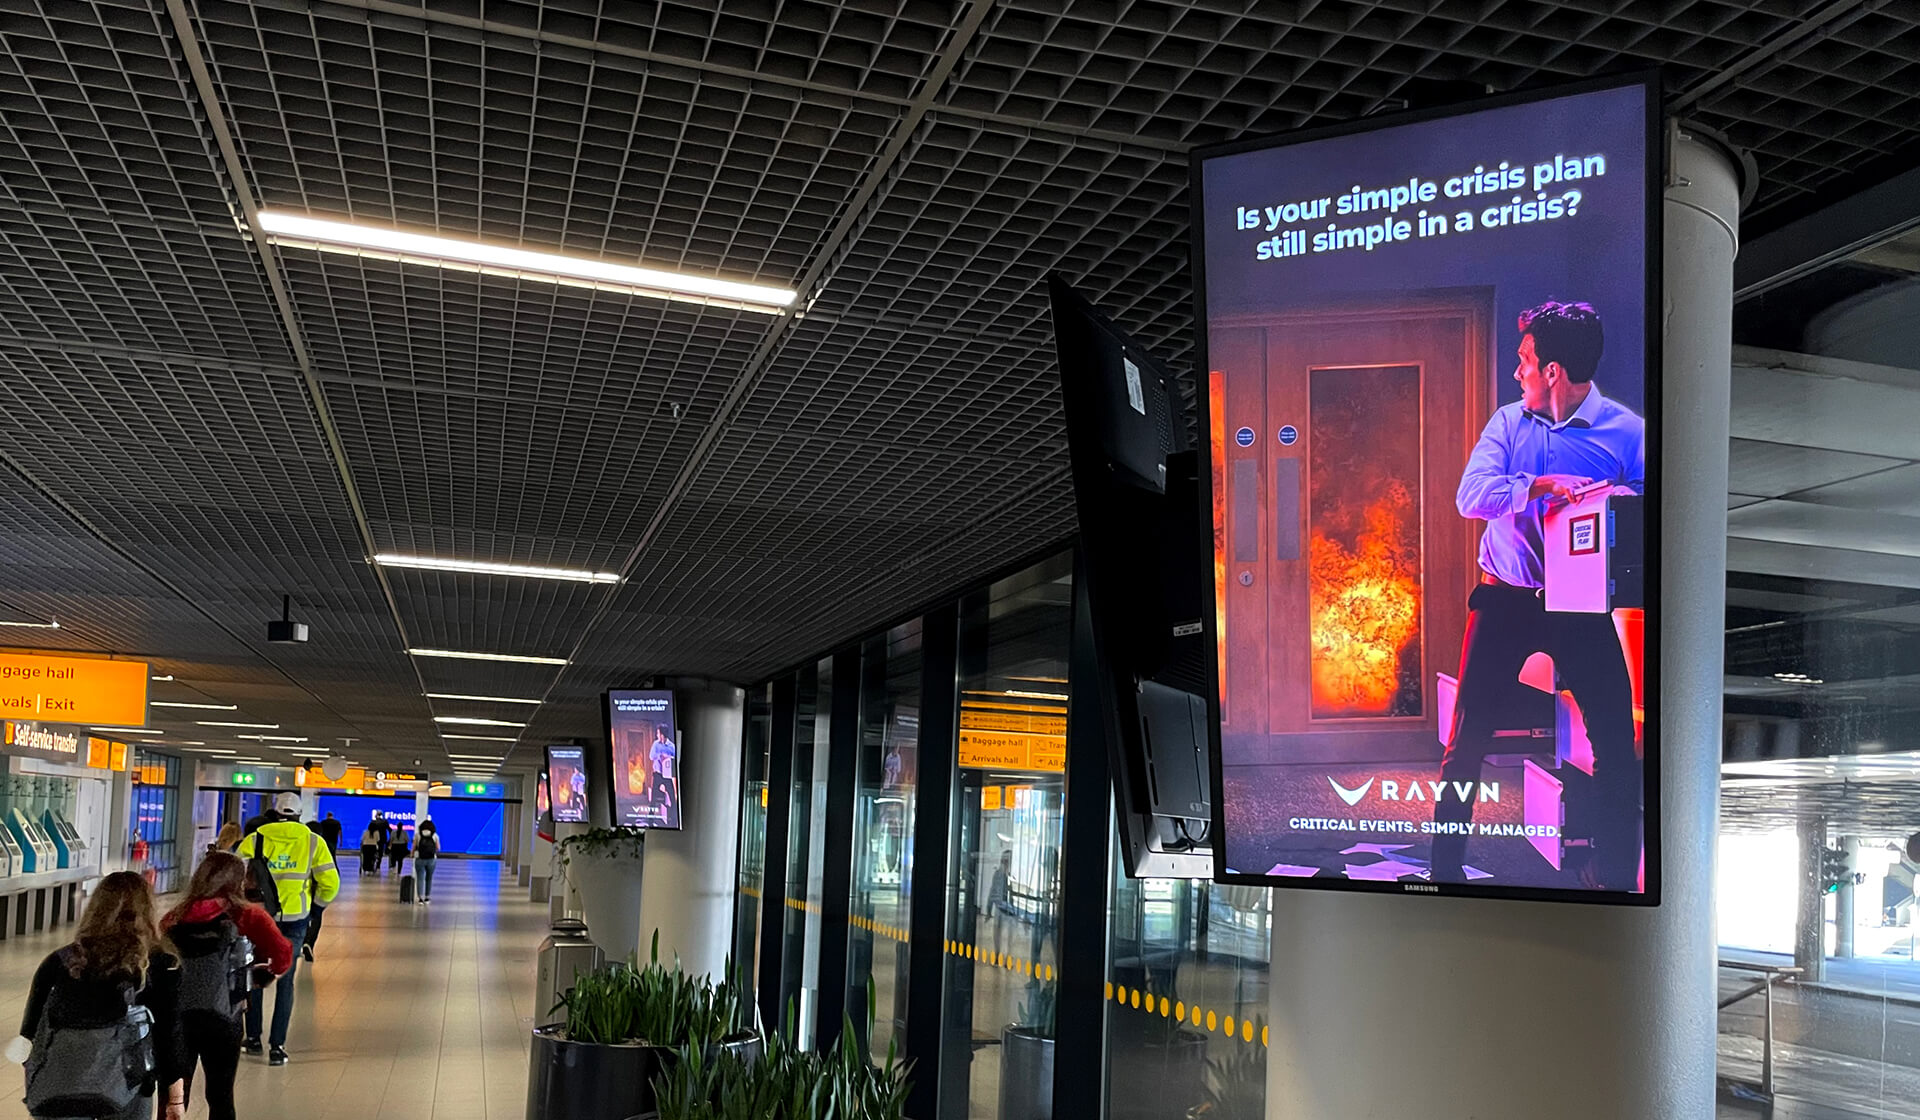 Rayvn Crisis Management - Ad Campaign - Mellor&Smith - OOH in Schiphol airport